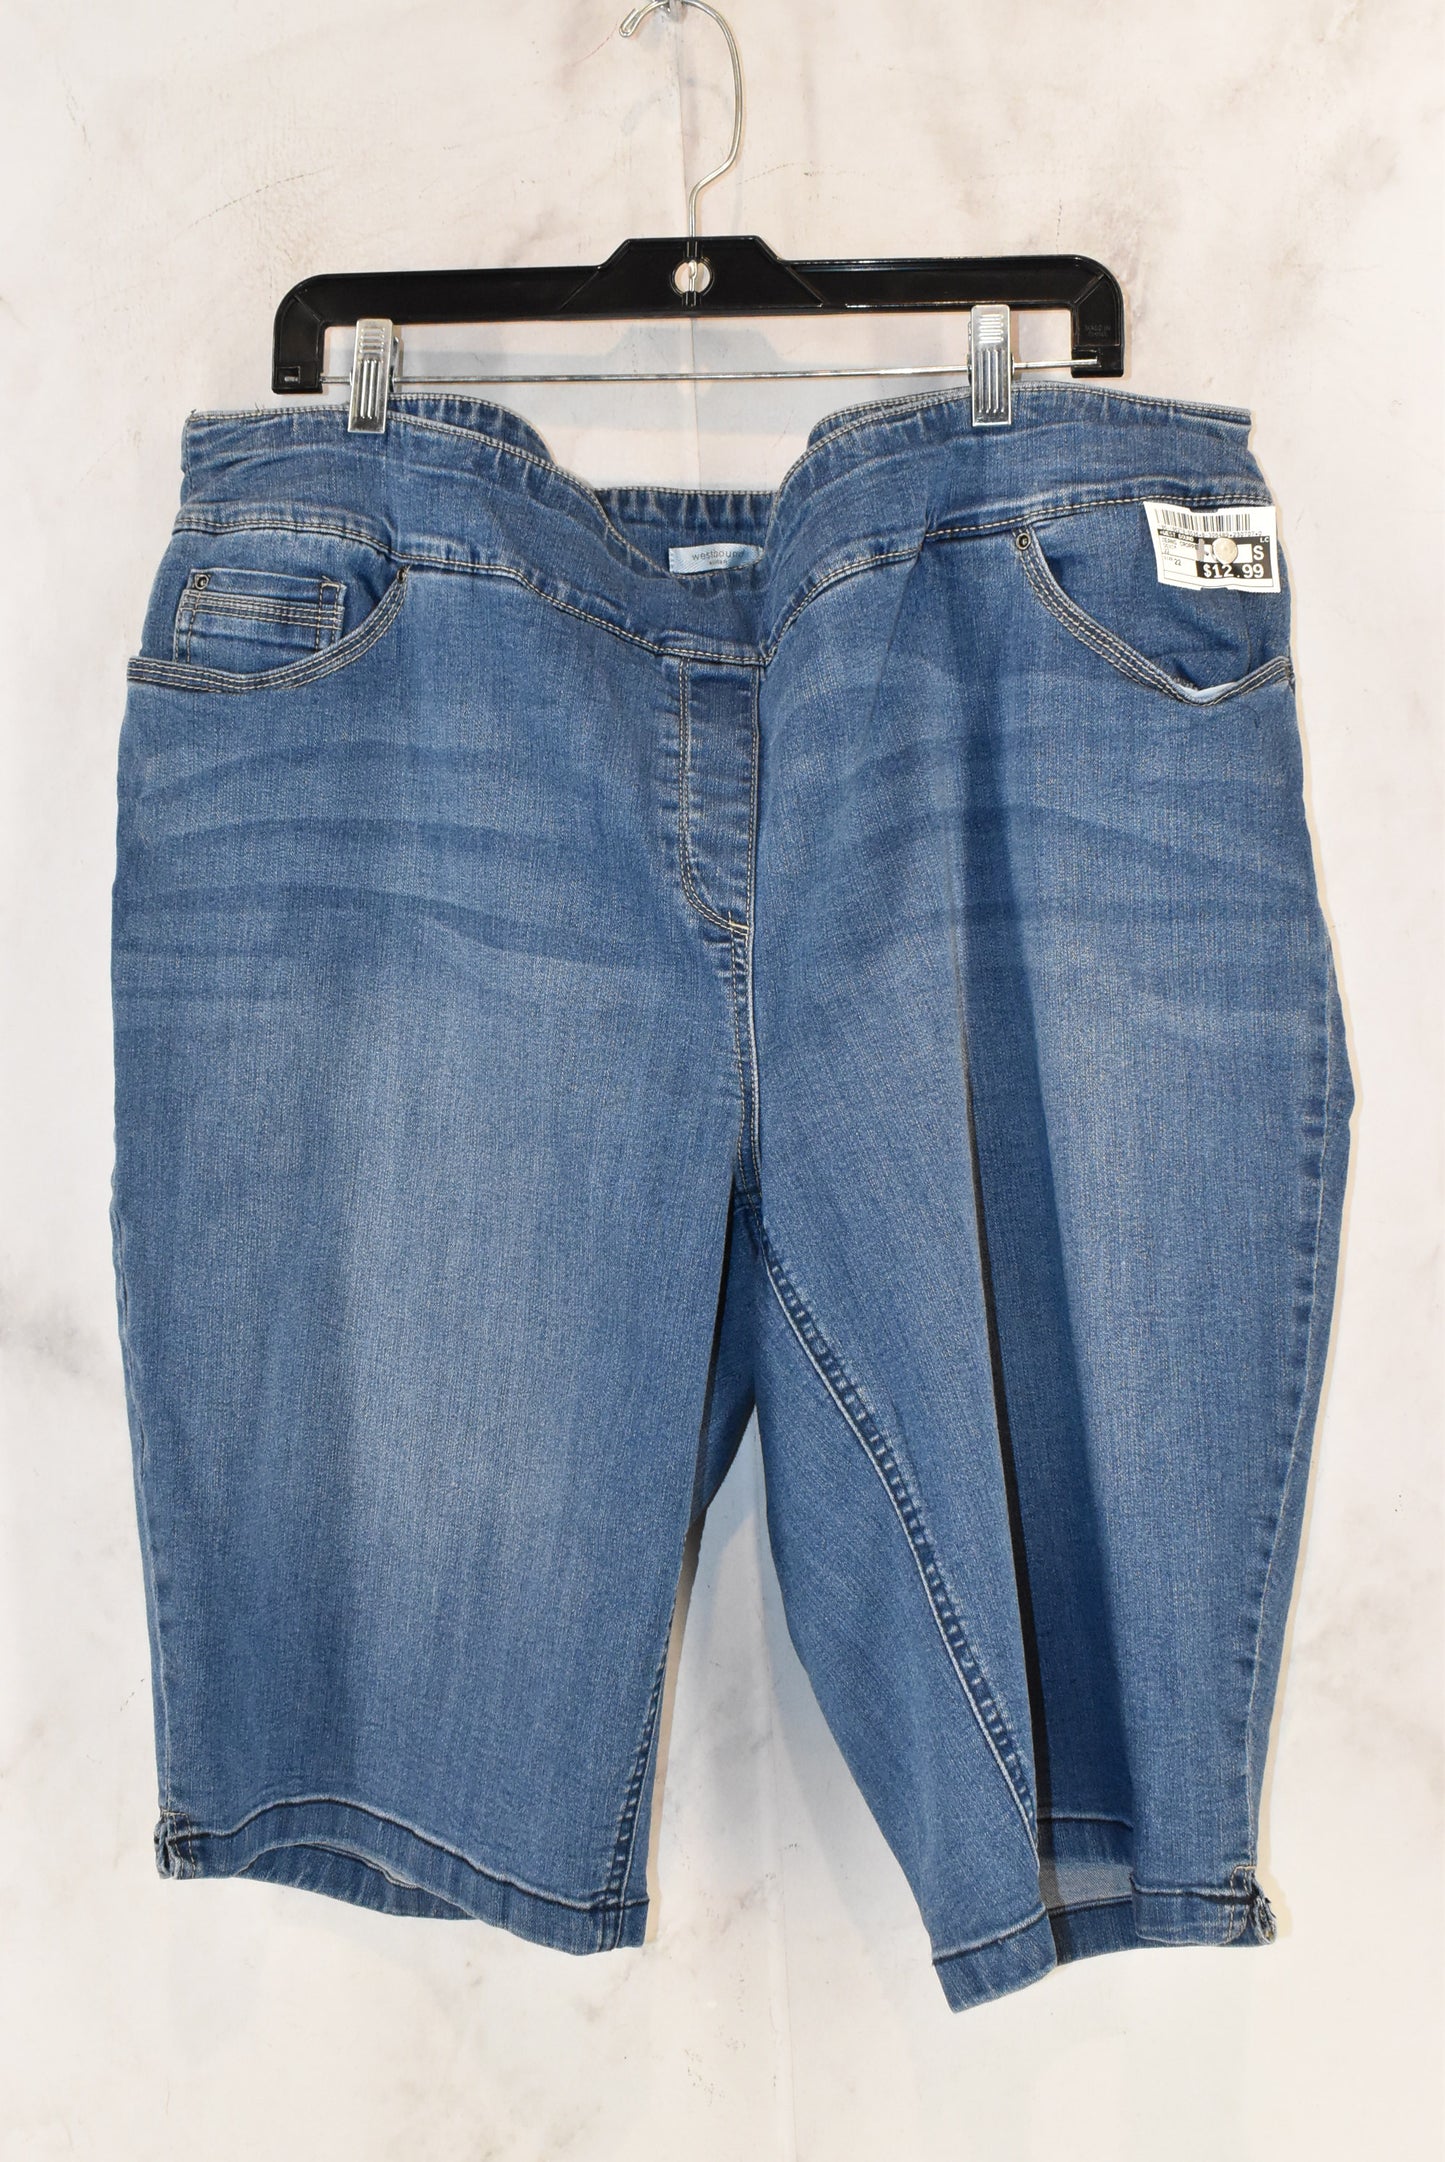 Jeans Cropped By West Bound  Size: 22